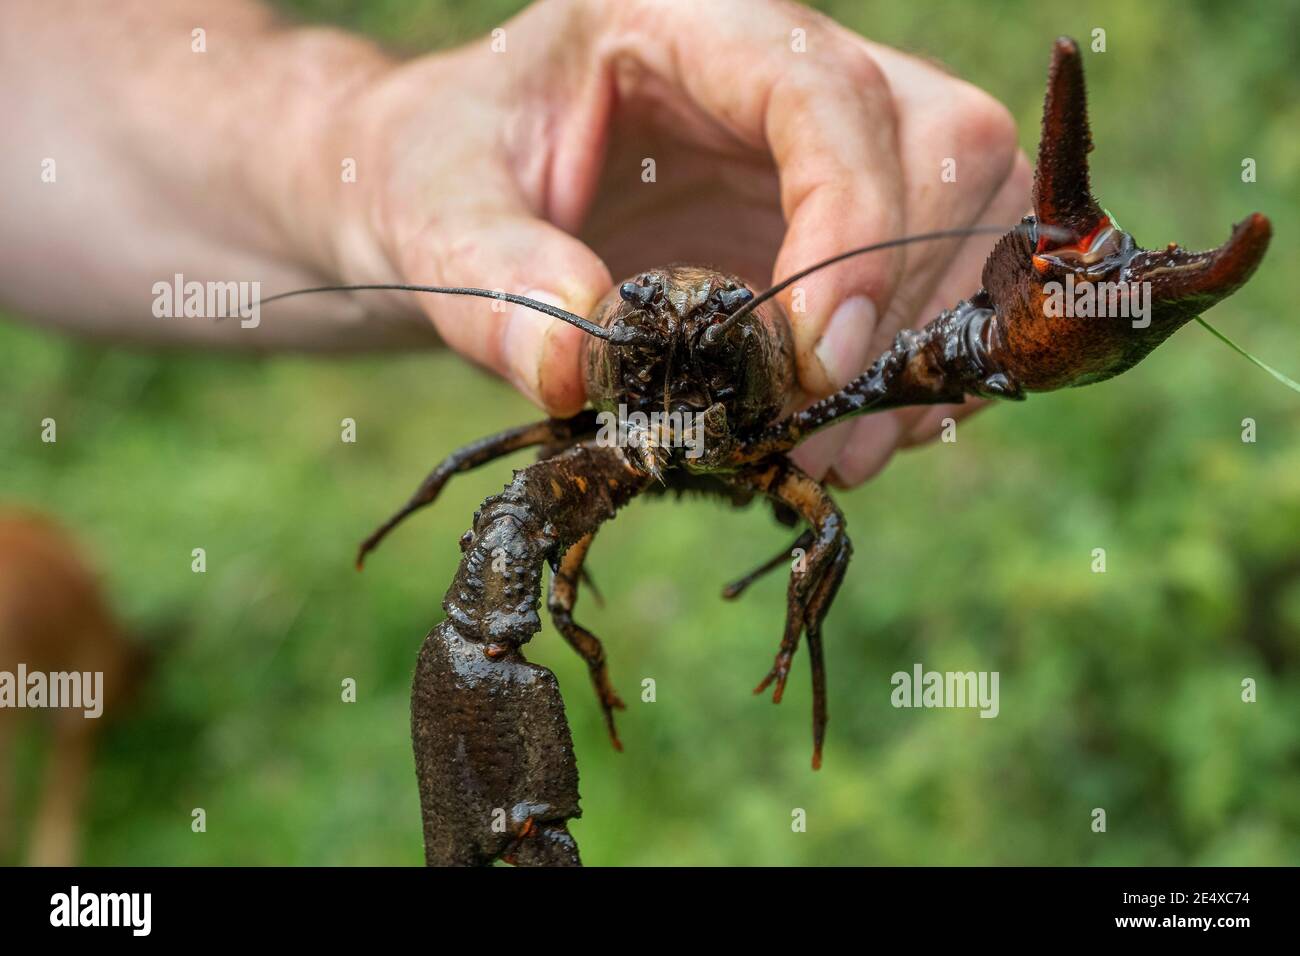 Astacus astacus, the European crayfish, noble crayfish, or broad-fingered crayfish, is the most common species of crayfish in Europe. , beatiful photo Stock Photo